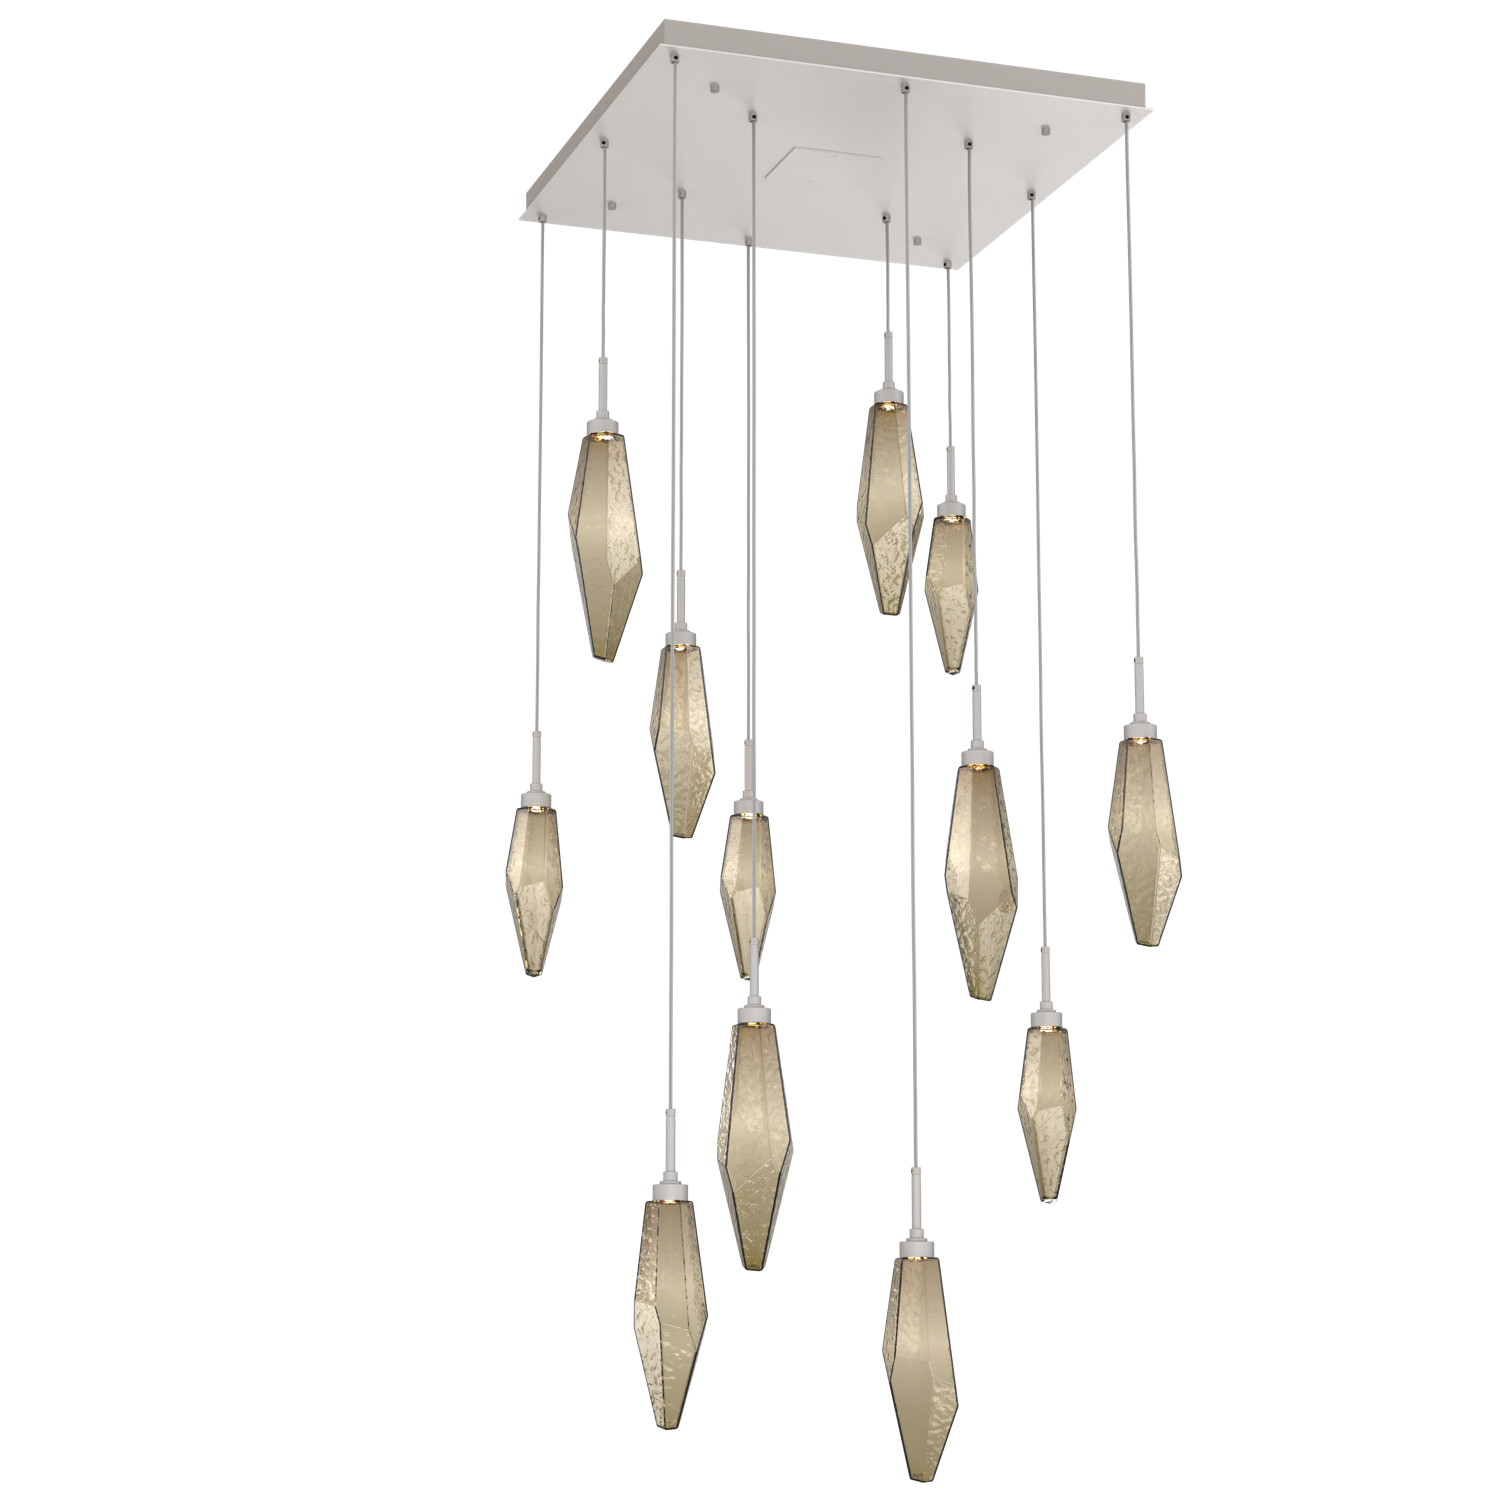 CHB0050-12-BS-CB-Hammerton-Studio-Rock-Crystal-12-light-square-pendant-chandelier-with-beige-silver-finish-and-chilled-bronze-blown-glass-shades-and-LED-lamping